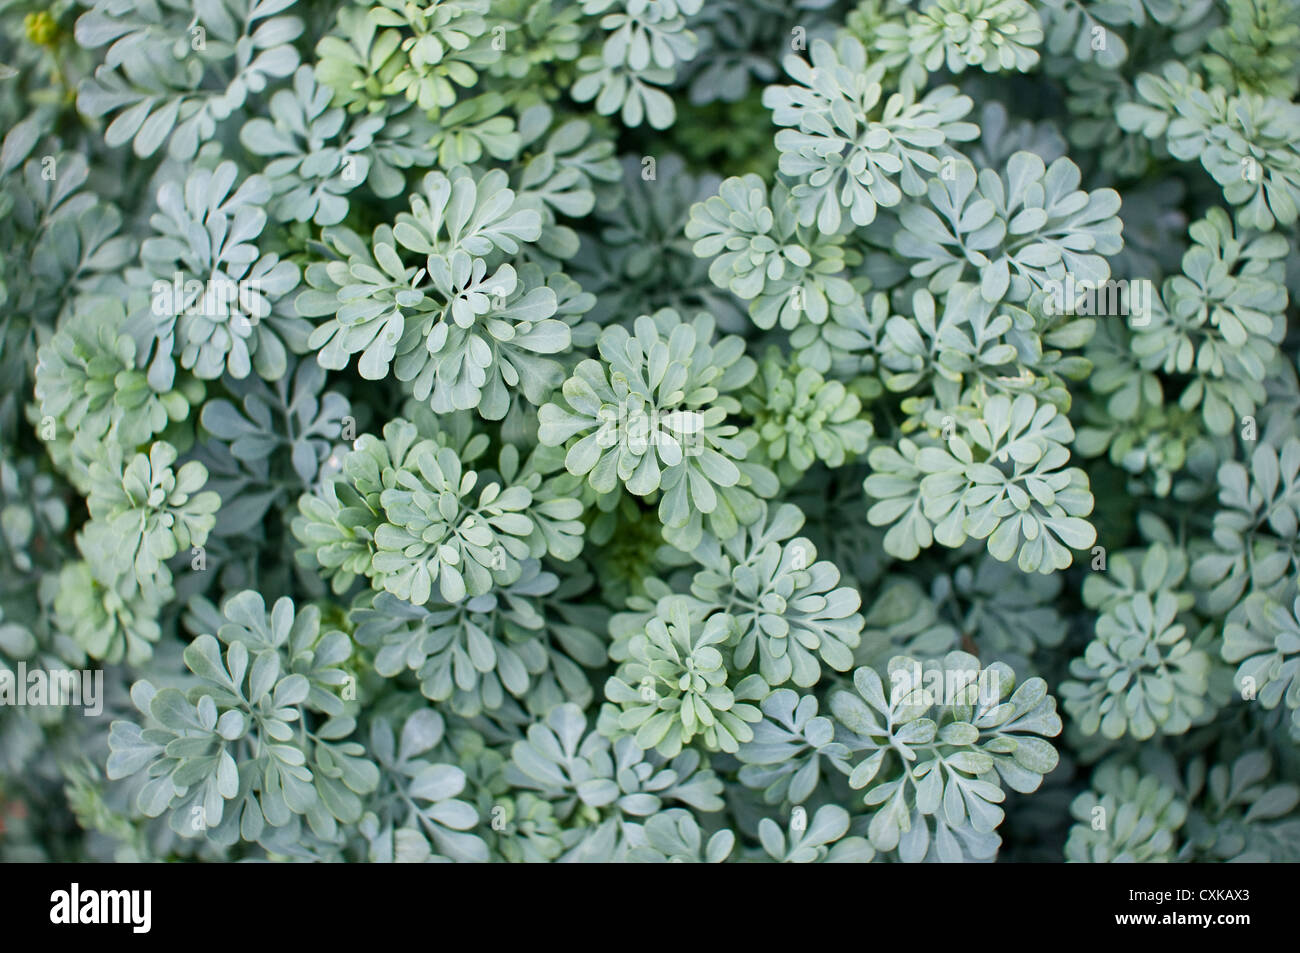 Rue leaves growing in an English garden. Rue is a culinary and medicinal herb referenced in Shakespeare and Harry Potter. Stock Photo